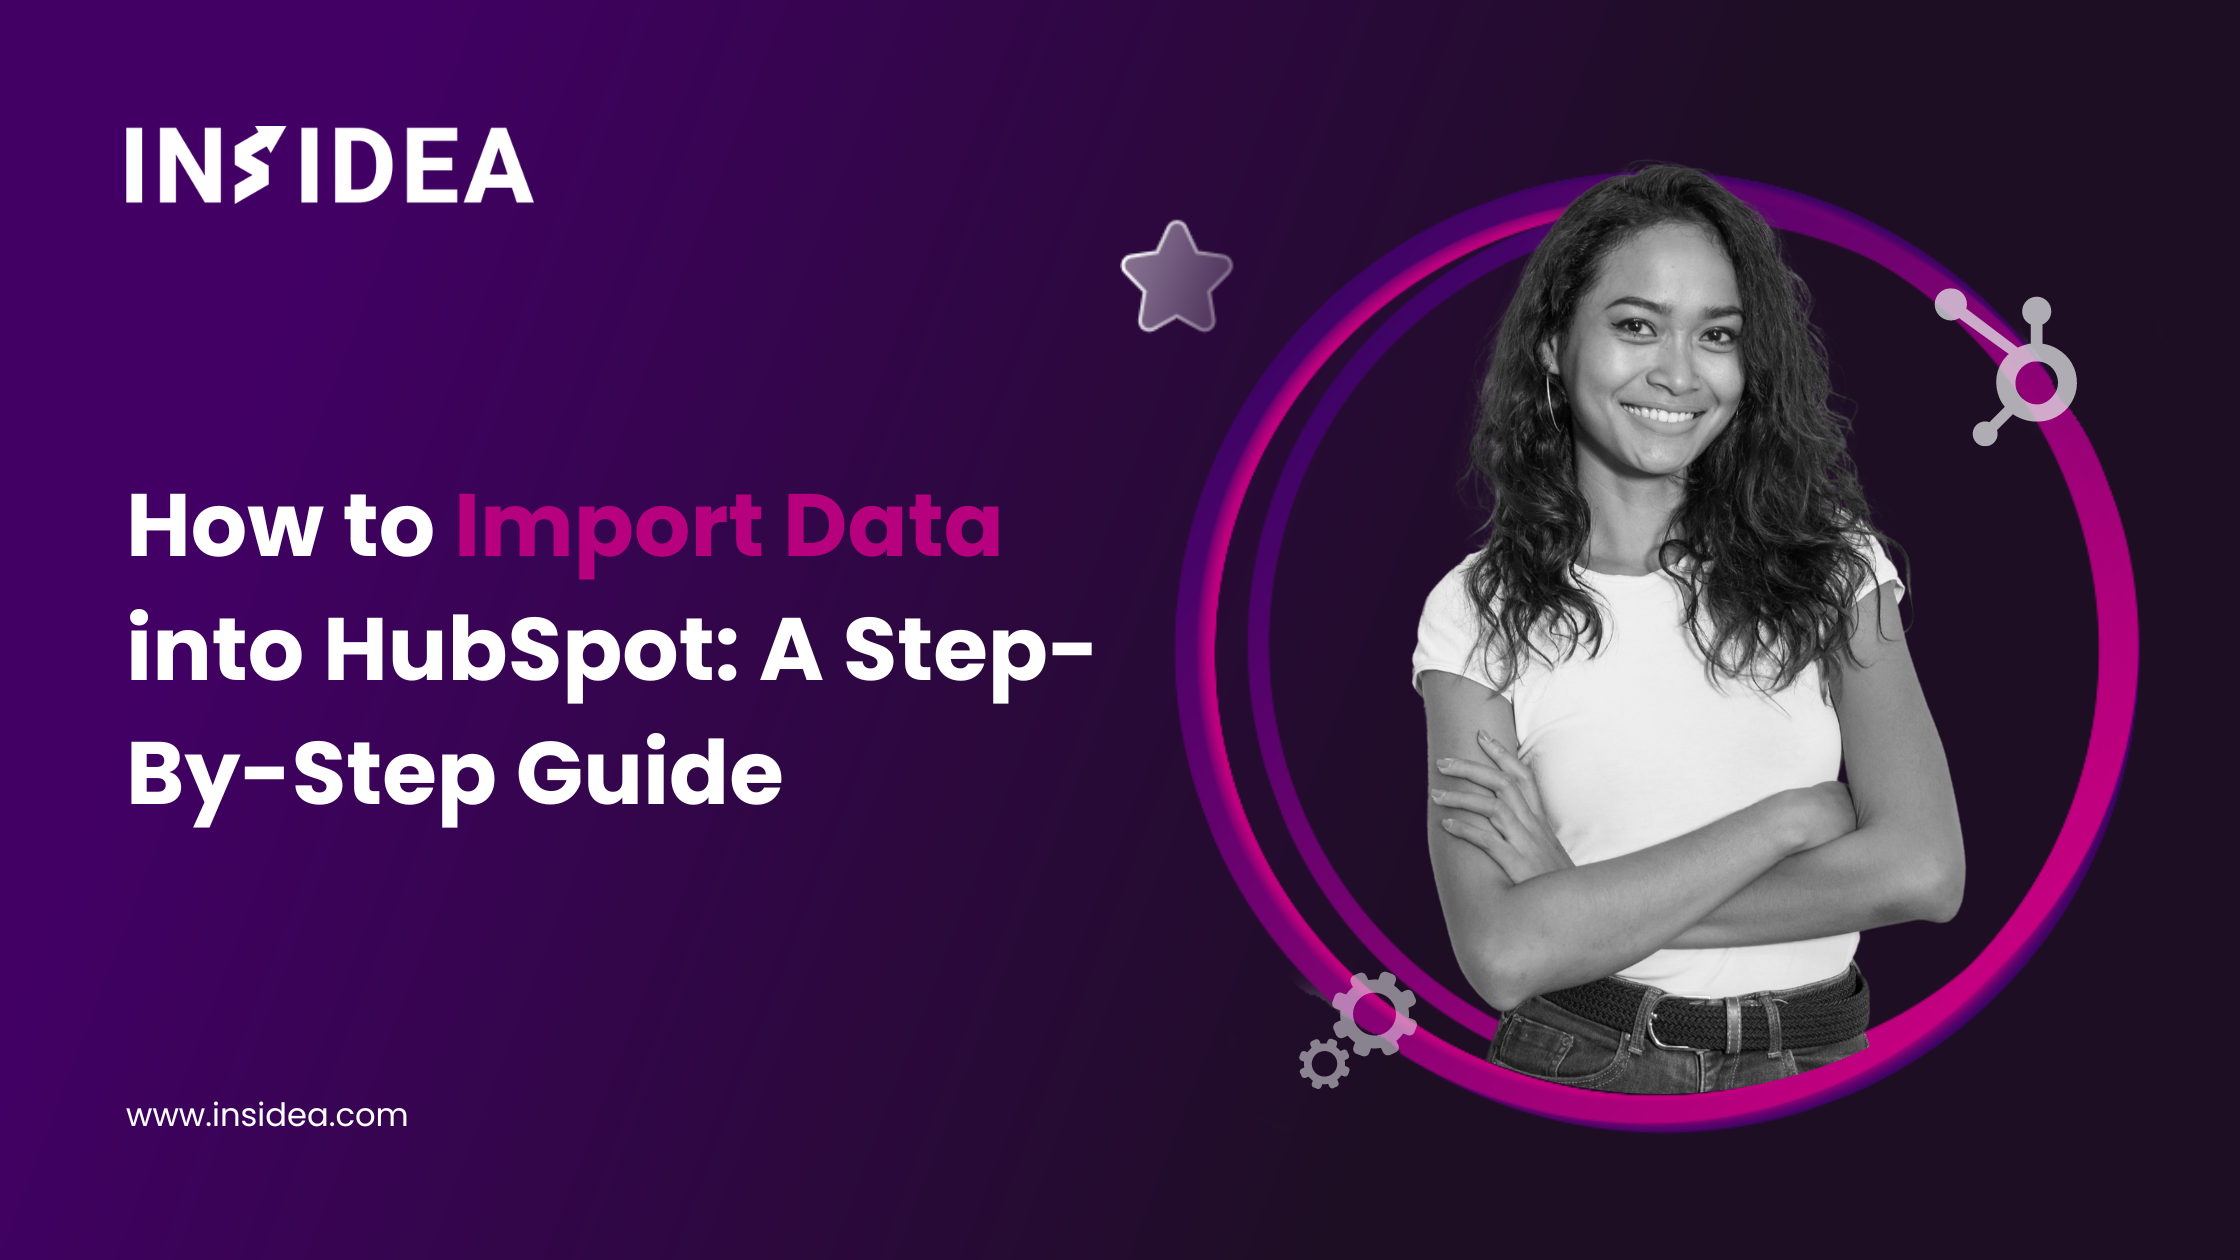 How to Import Data into HubSpot A Step-By-Step Guide